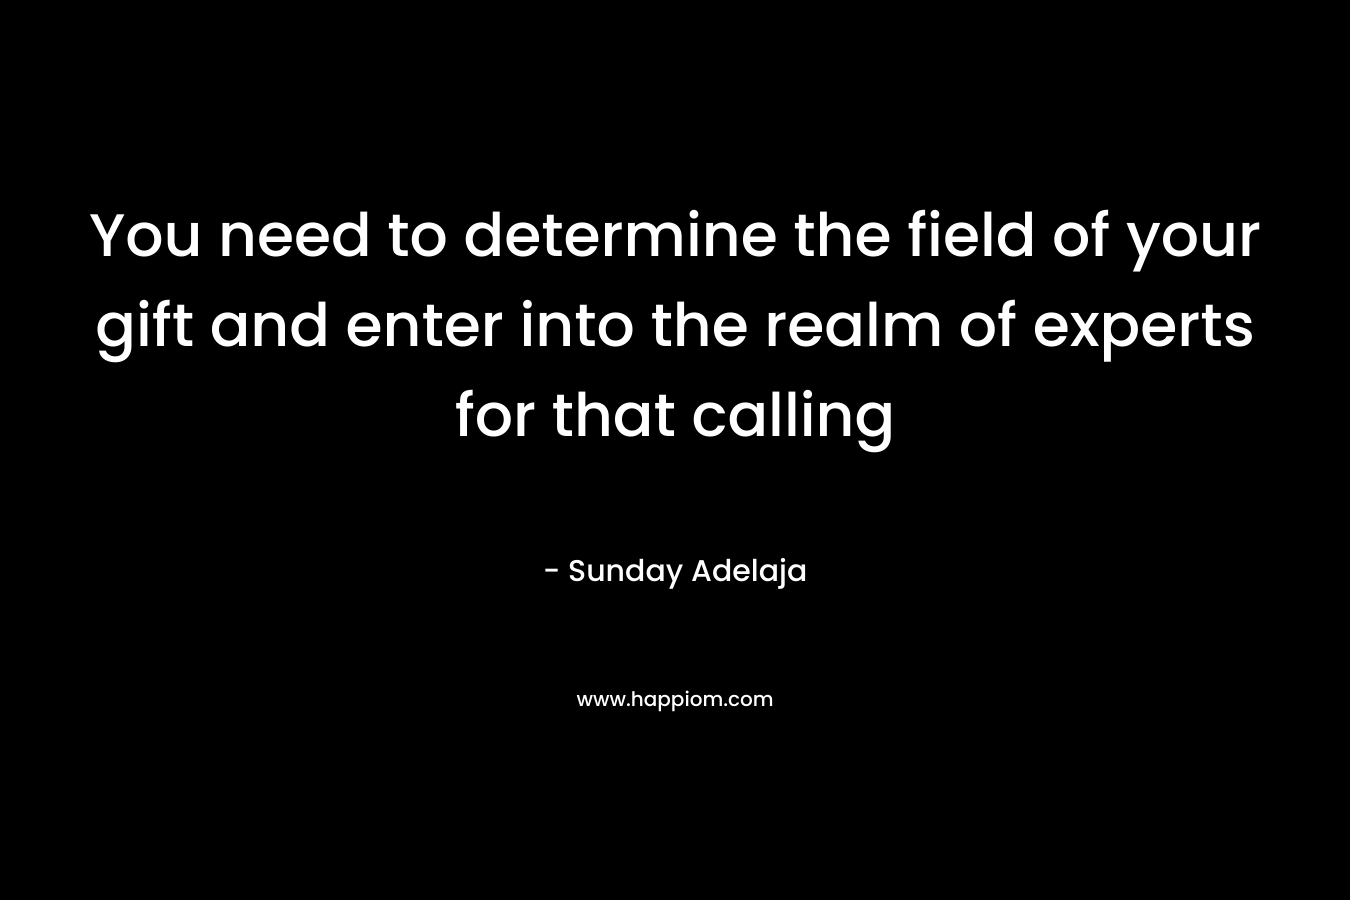 You need to determine the field of your gift and enter into the realm of experts for that calling